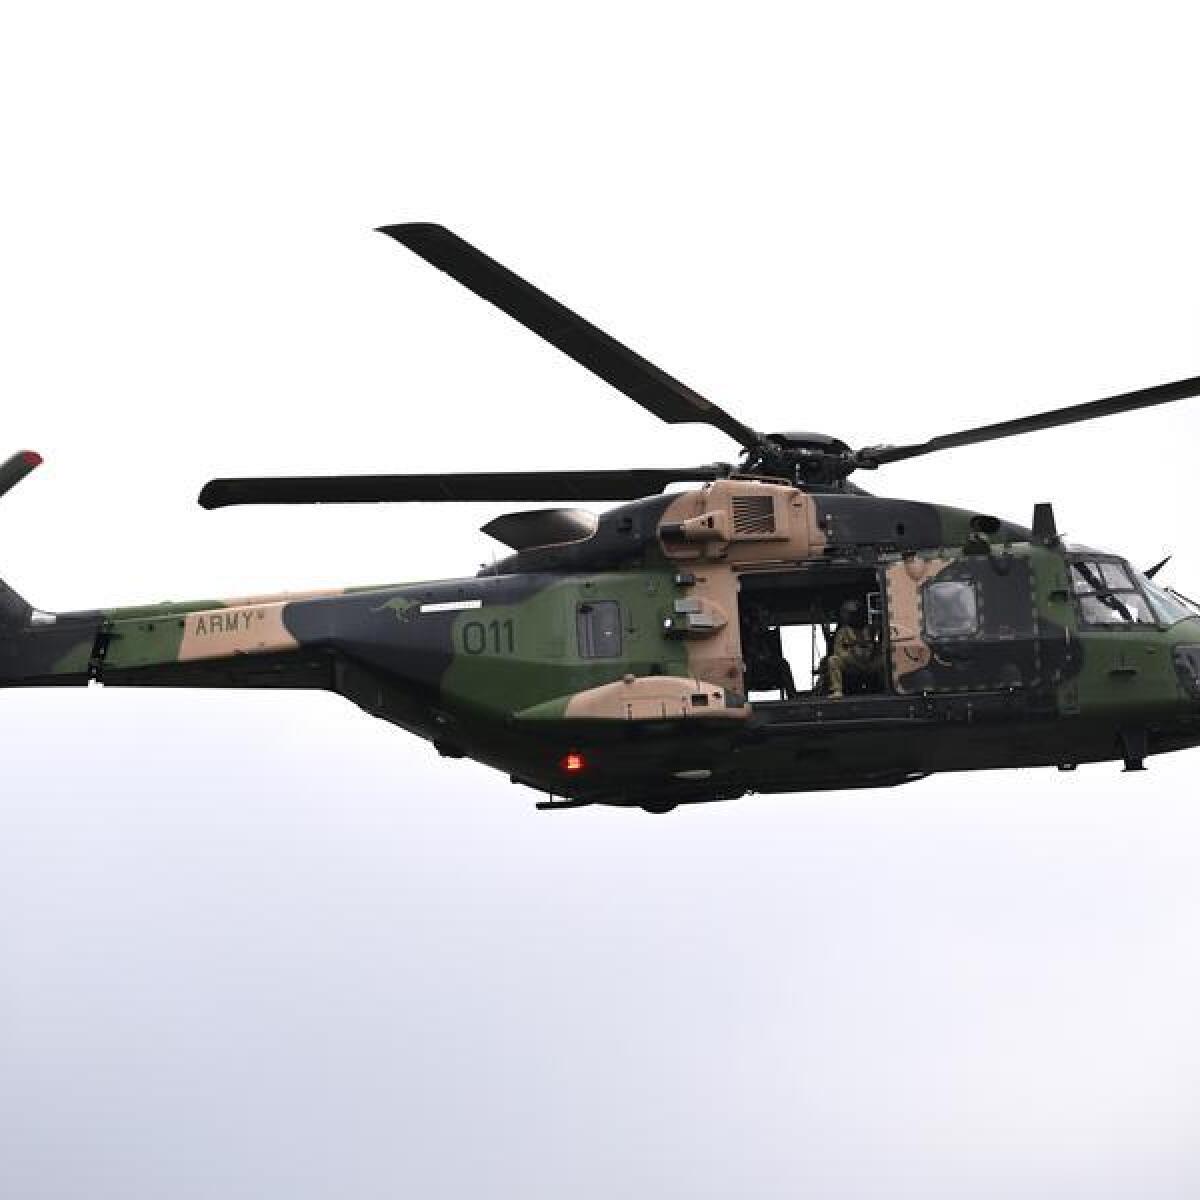 MRH-90 Taipan helicopter